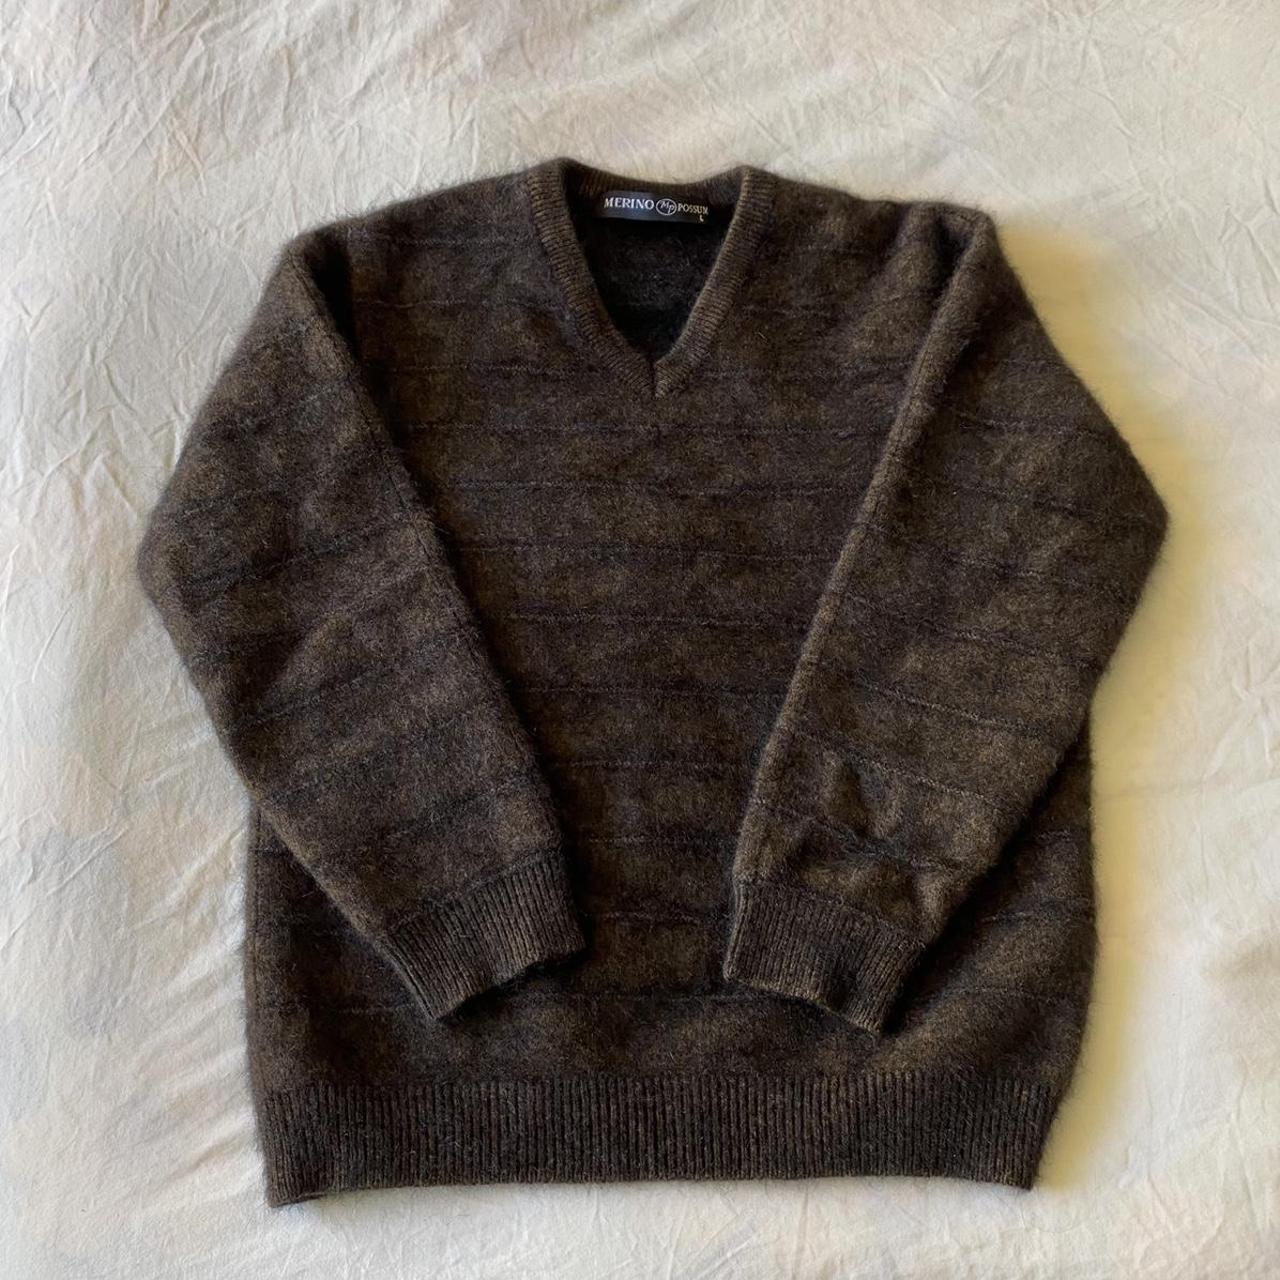 Merino and Possum wool knit sweater with a v-neck.... - Depop